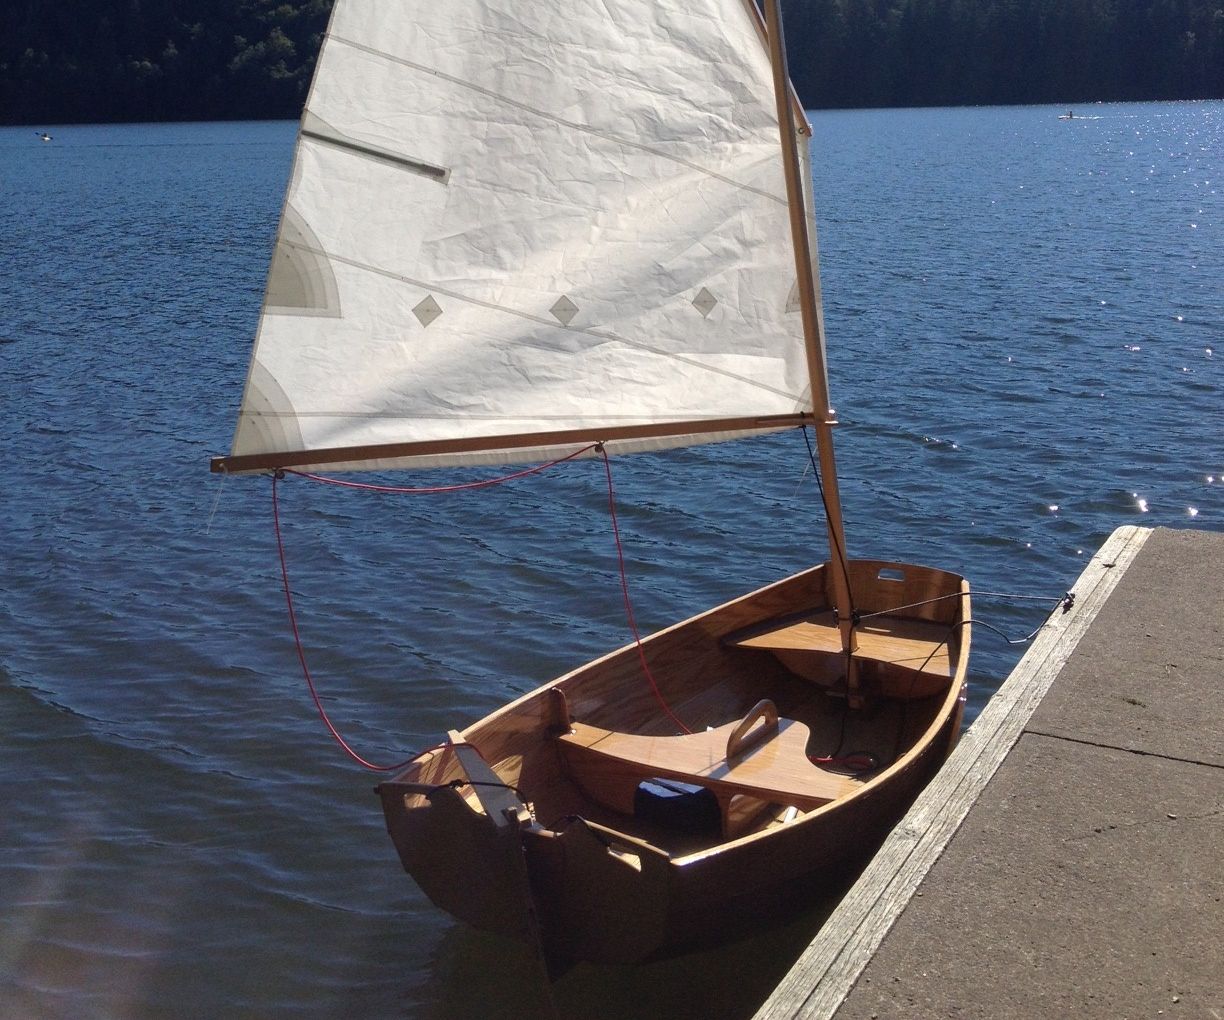 How to Build a Wood Sailboat